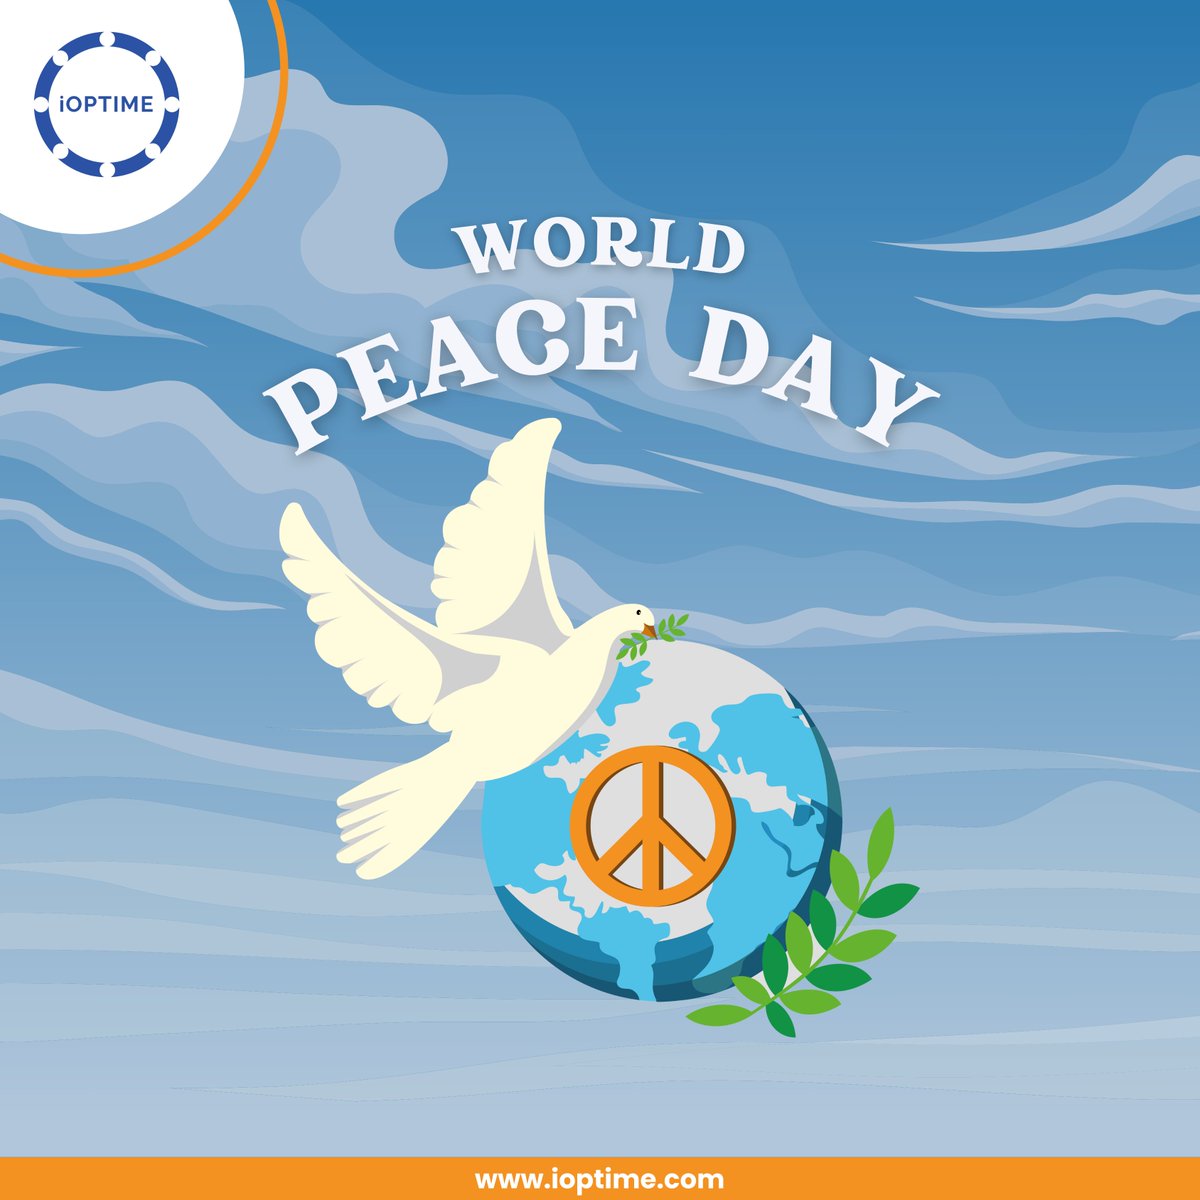 Let's unite for a world where peace reigns, not just for a day, but for a lifetime.

#worldpeaceday #harmonyandhappiness